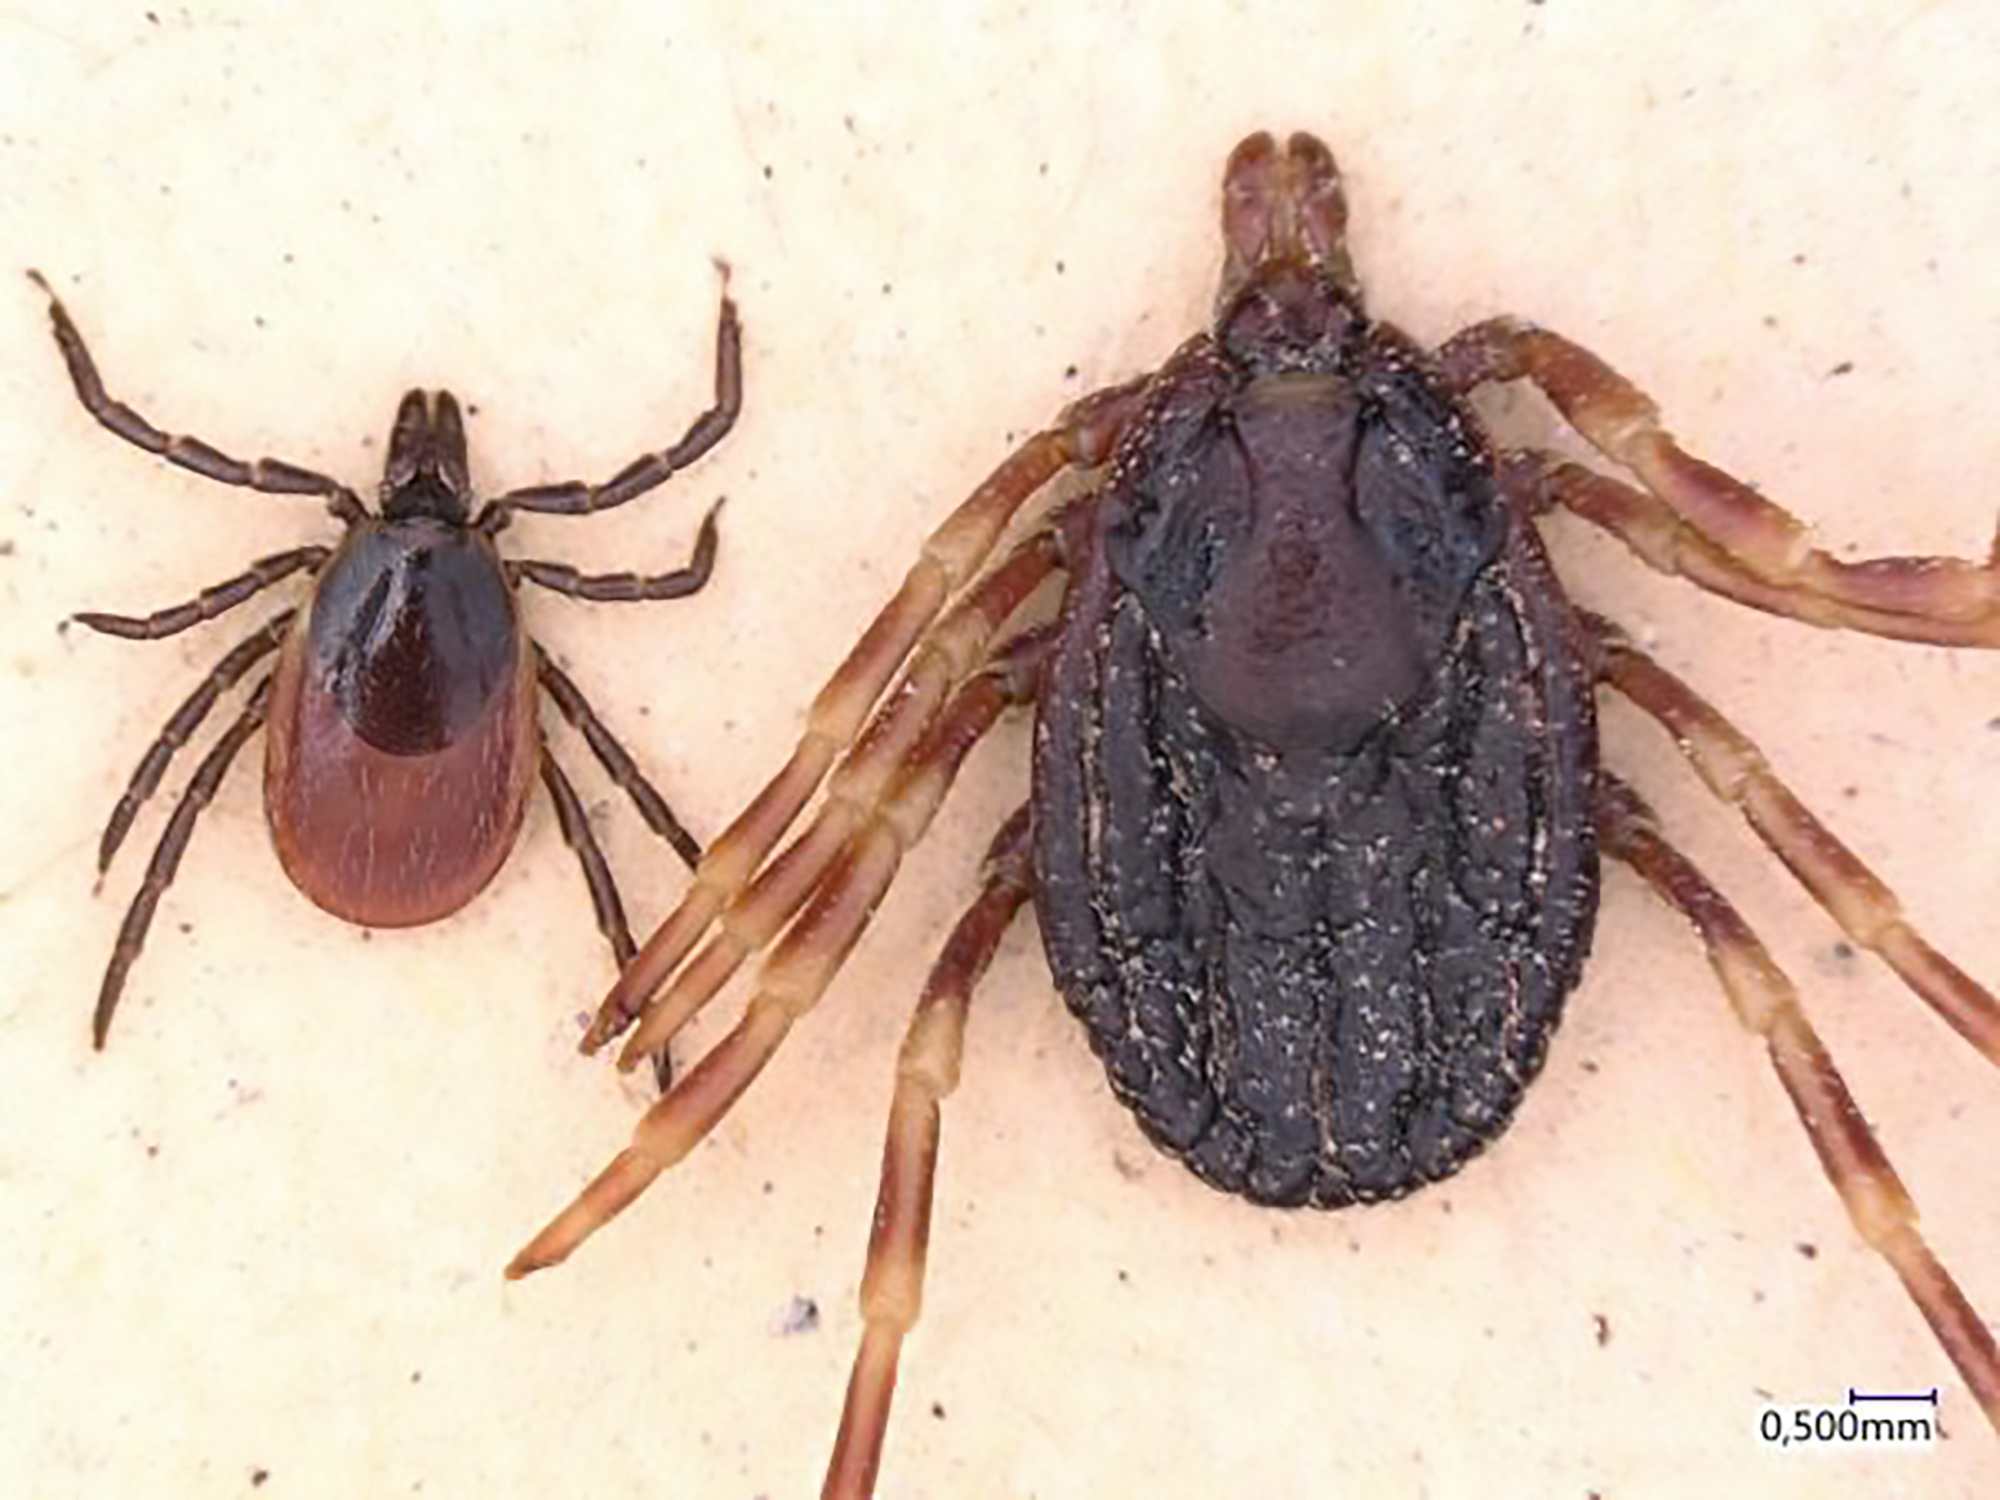 Read more about the article Mutant Ticks With Ebola-Like Virus Spread After UK Find